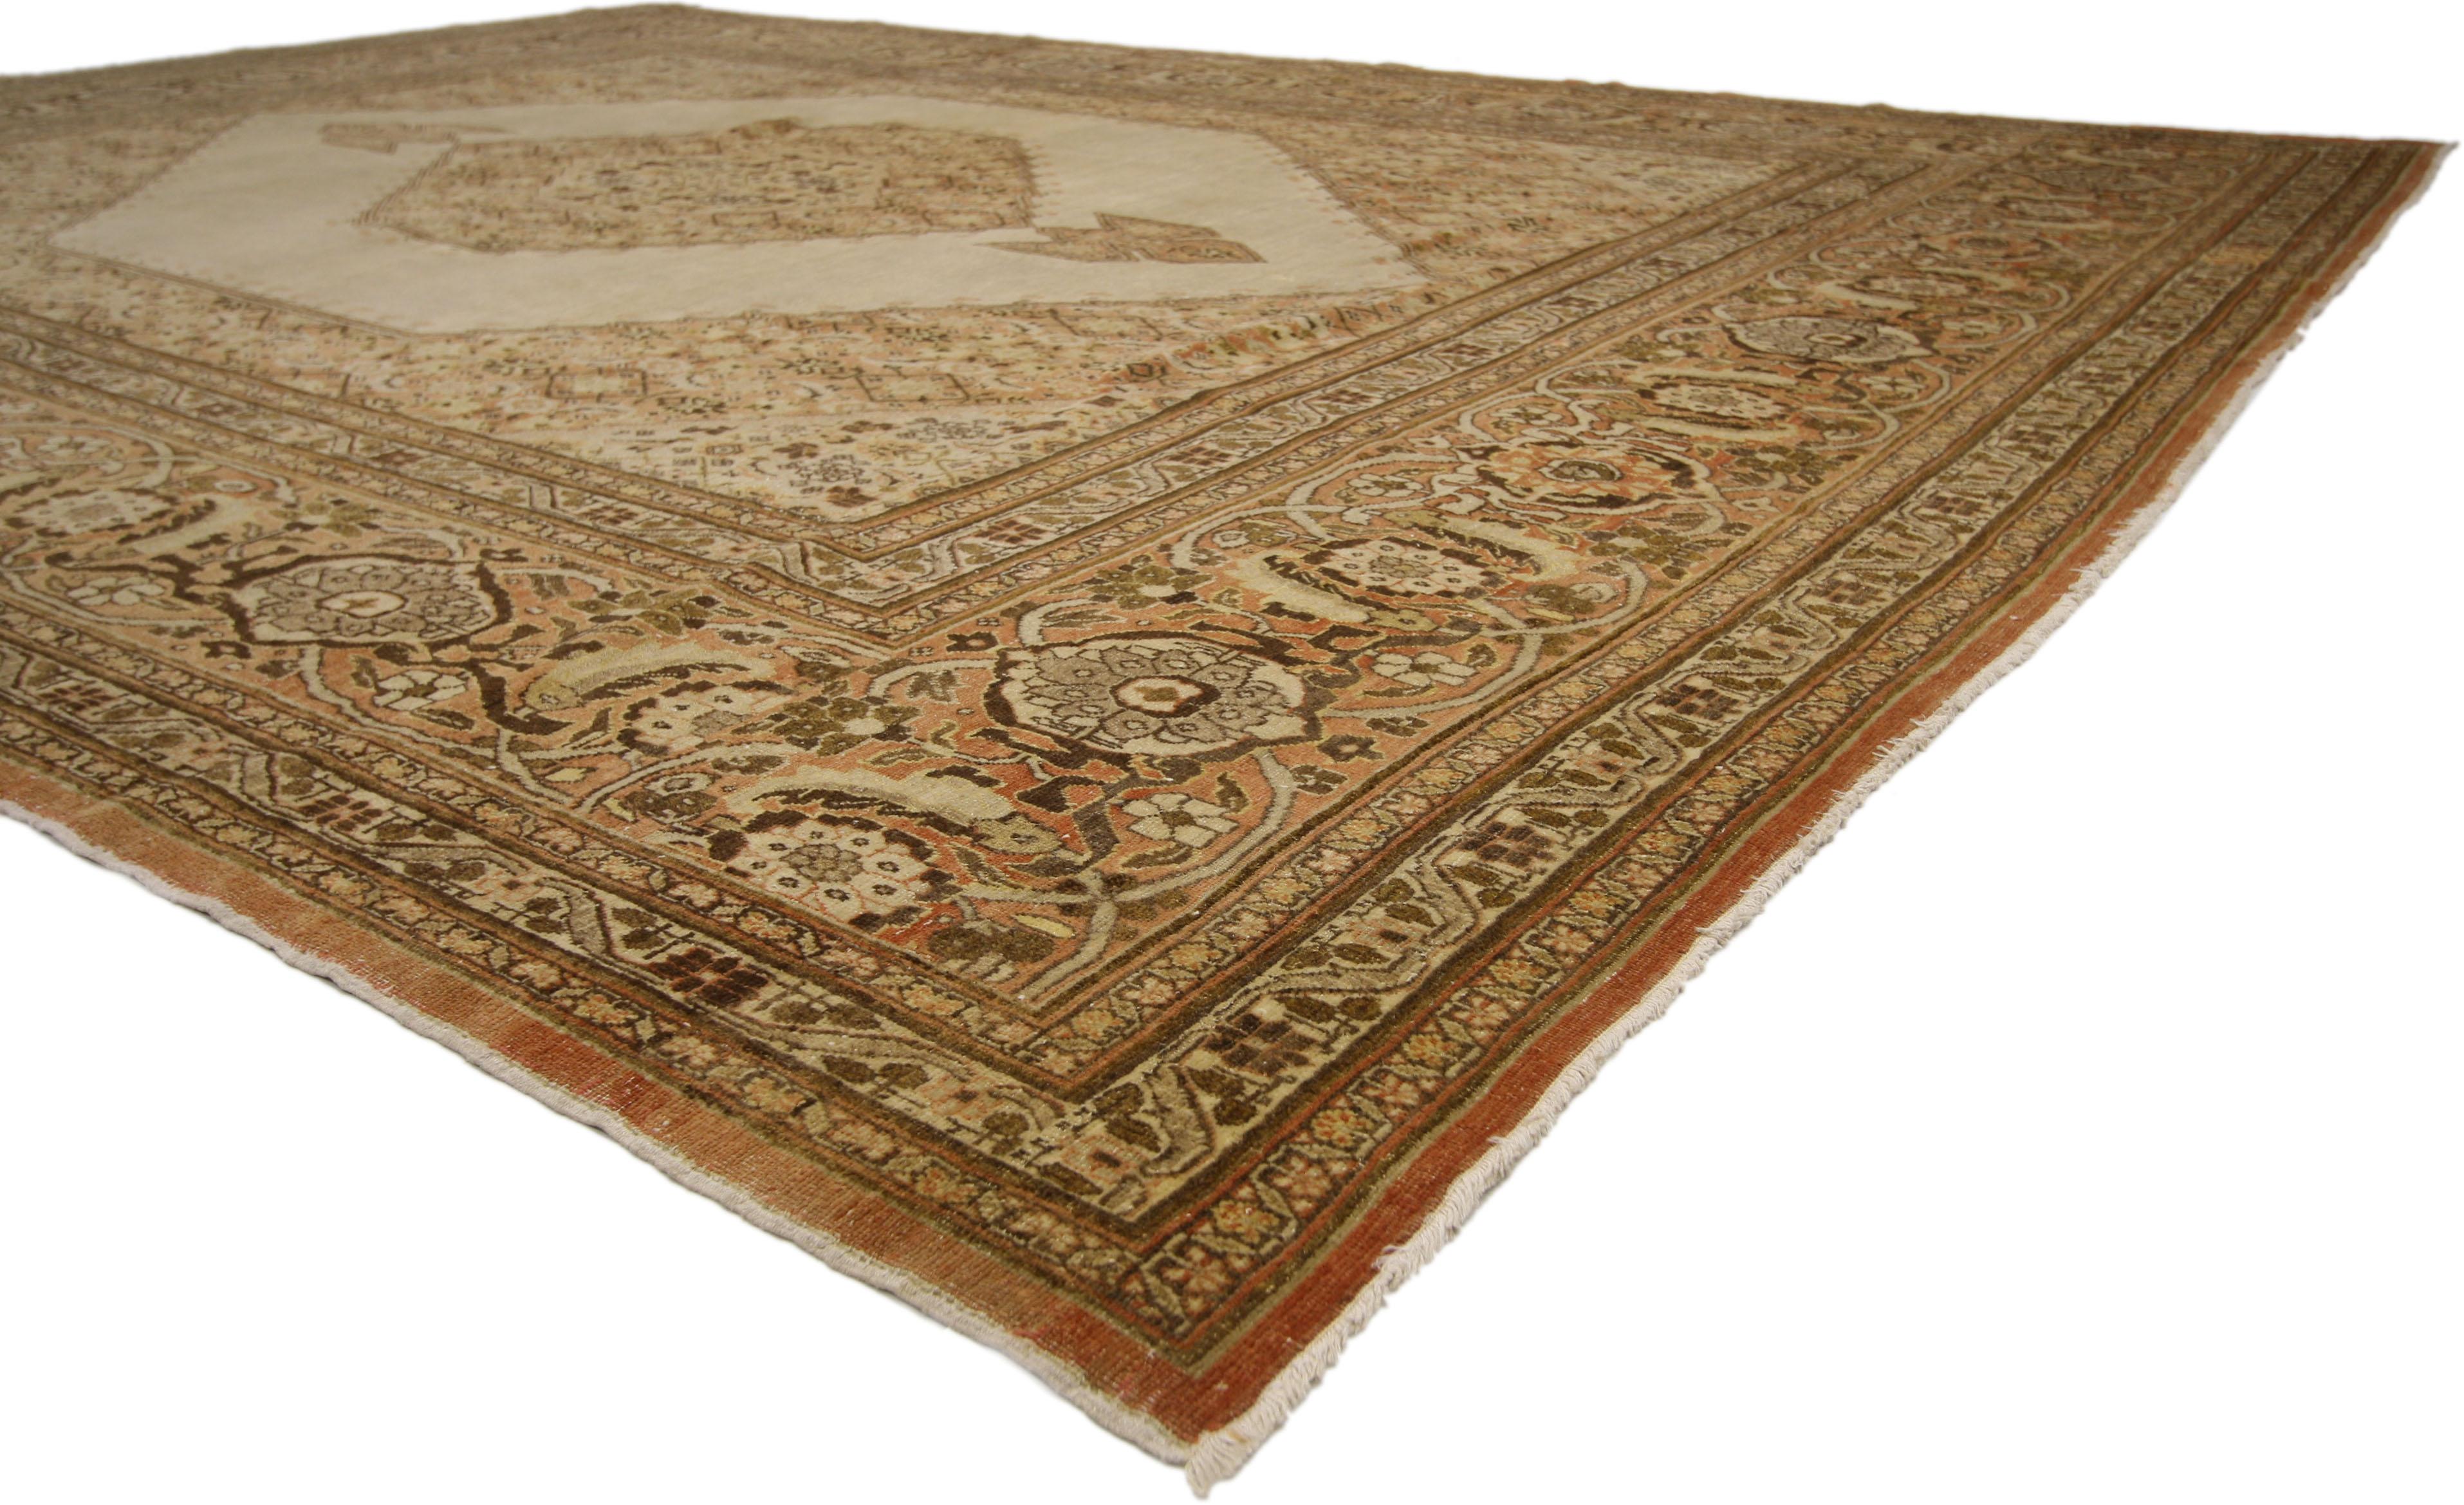 74938 Haji Khalili Antique Persian Tabriz Rug, 09'05 x 12'07. 

Haji Khalili Persian Tabriz rugs are renowned for their exceptional quality and intricate designs, originating from Tabriz, Iran, a historic hub of rug weaving. Crafted by skilled